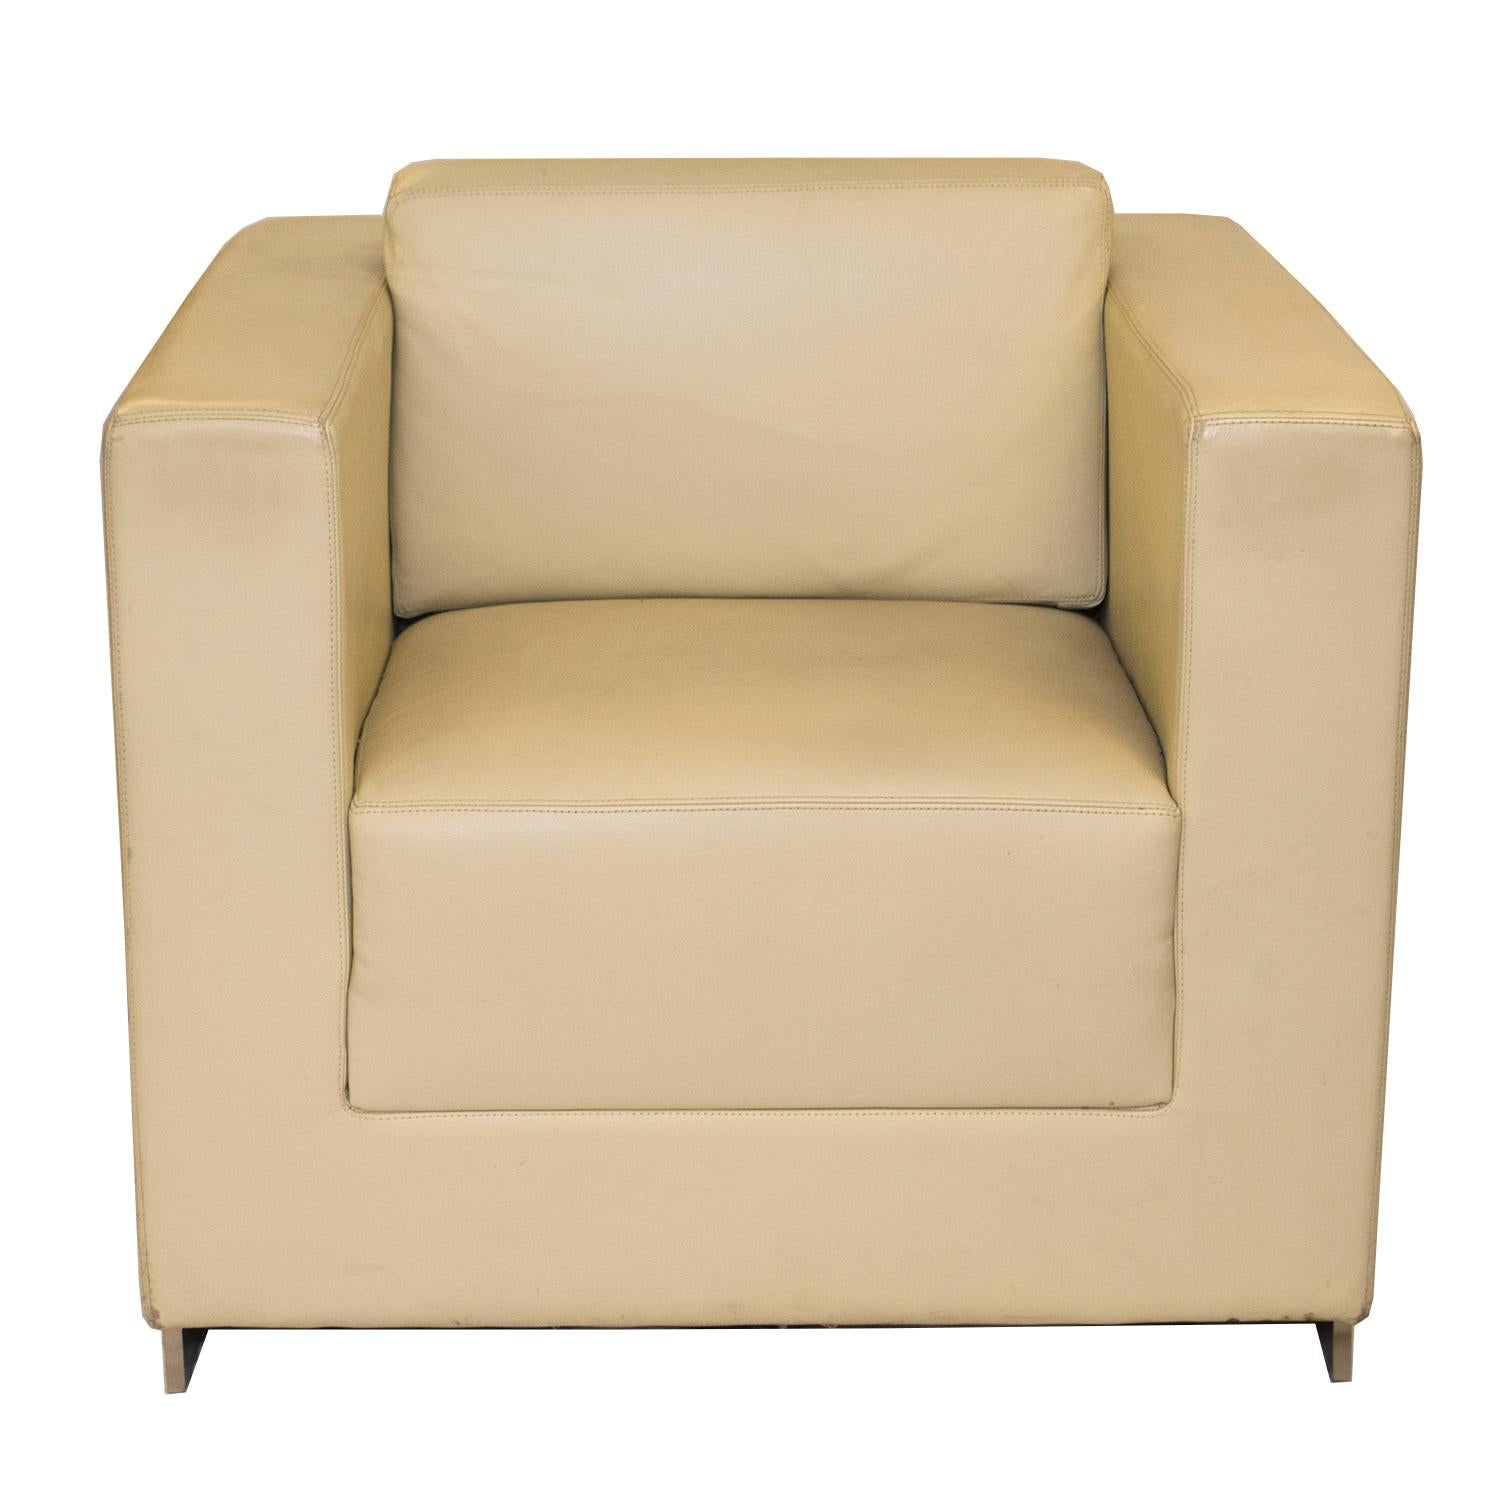 Pair of cube lounge chairs manufactured by Bernhardt Furniture upholstered in a supple creme leather. Clean, simple and structured in design, this pair has a brushed nickel base, saddle stitching, and comfy foam cushioning. Made in North Carolina,